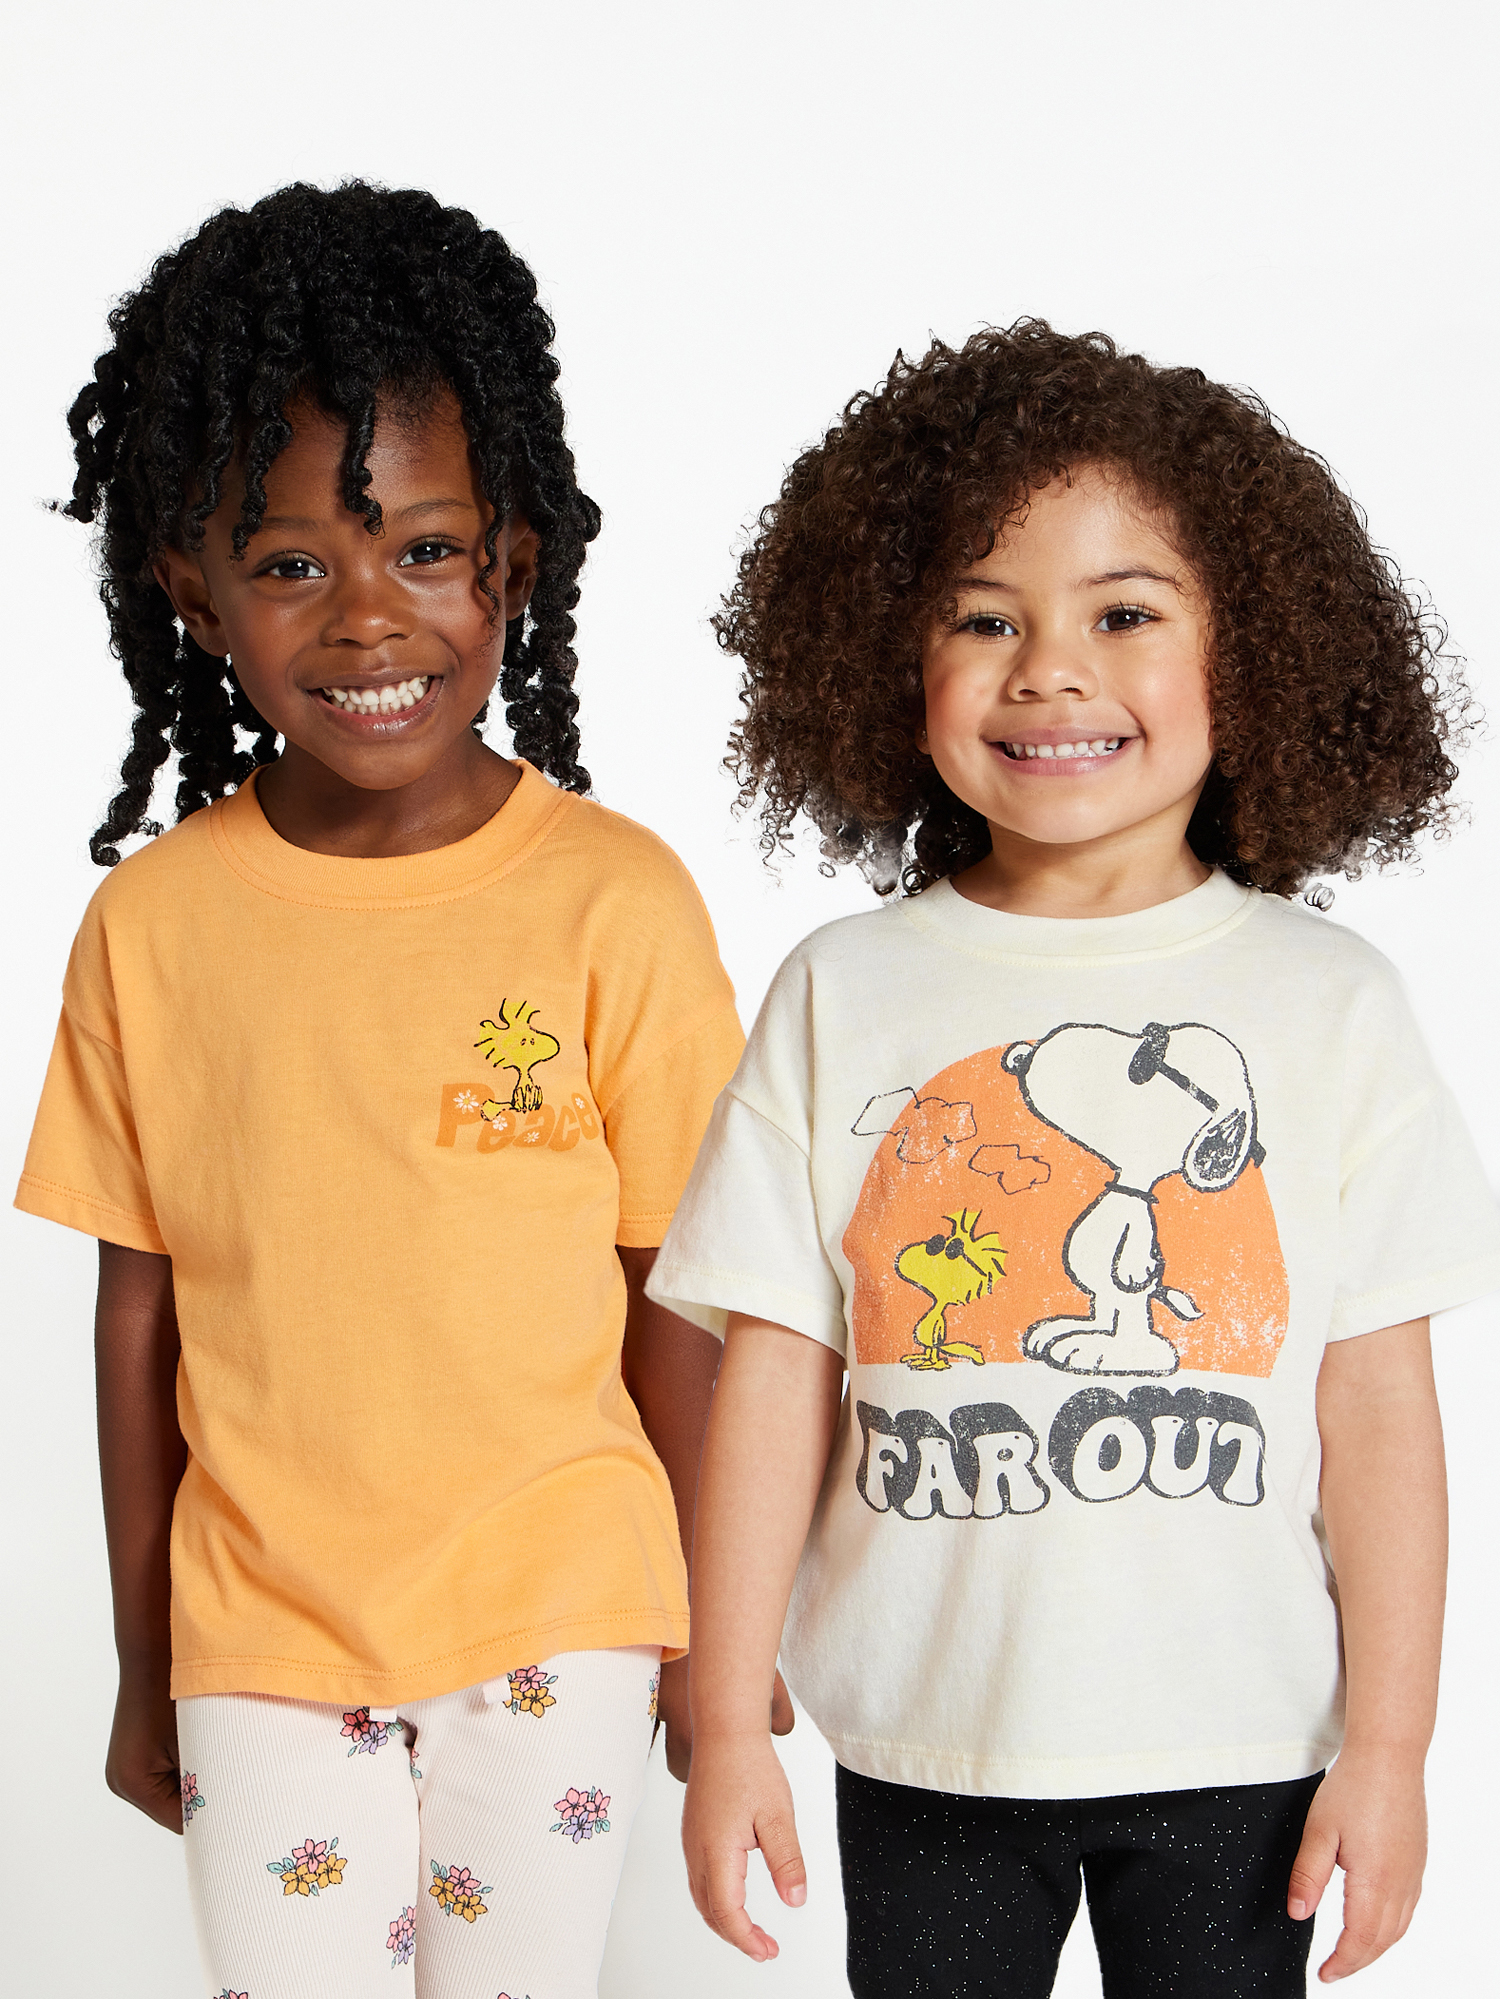 Peanuts Snoopy Toddler Boy Graphic Tees, 2-Pack, Sizes 2T-5T - image 2 of 8